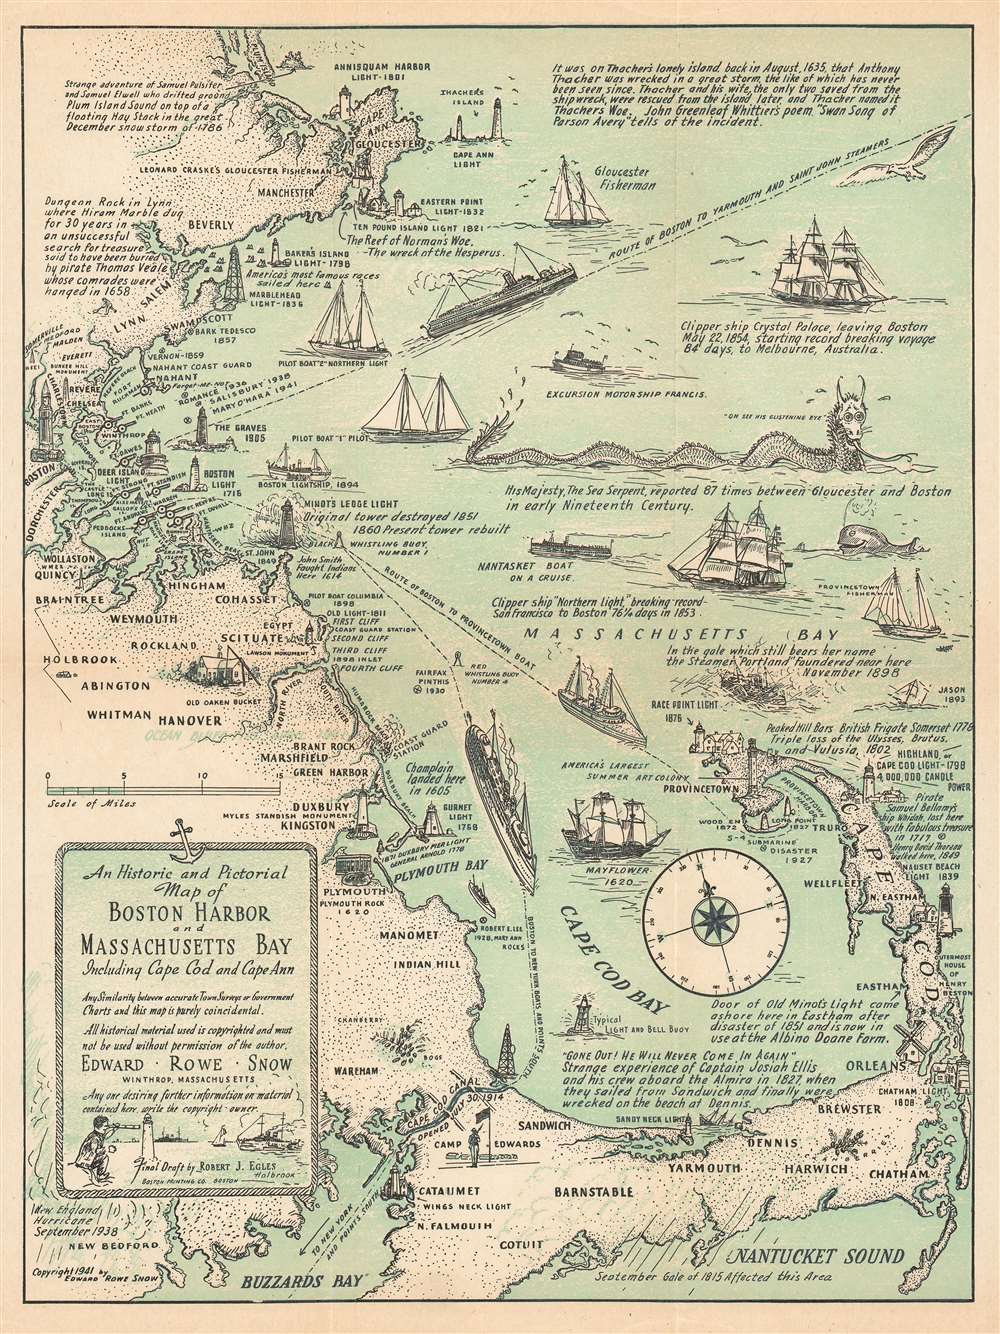 An Historic and Pictorial Map of Boston Harbor and Massachusetts Bay Includeing Cape Cod and Cape Ann. - Main View